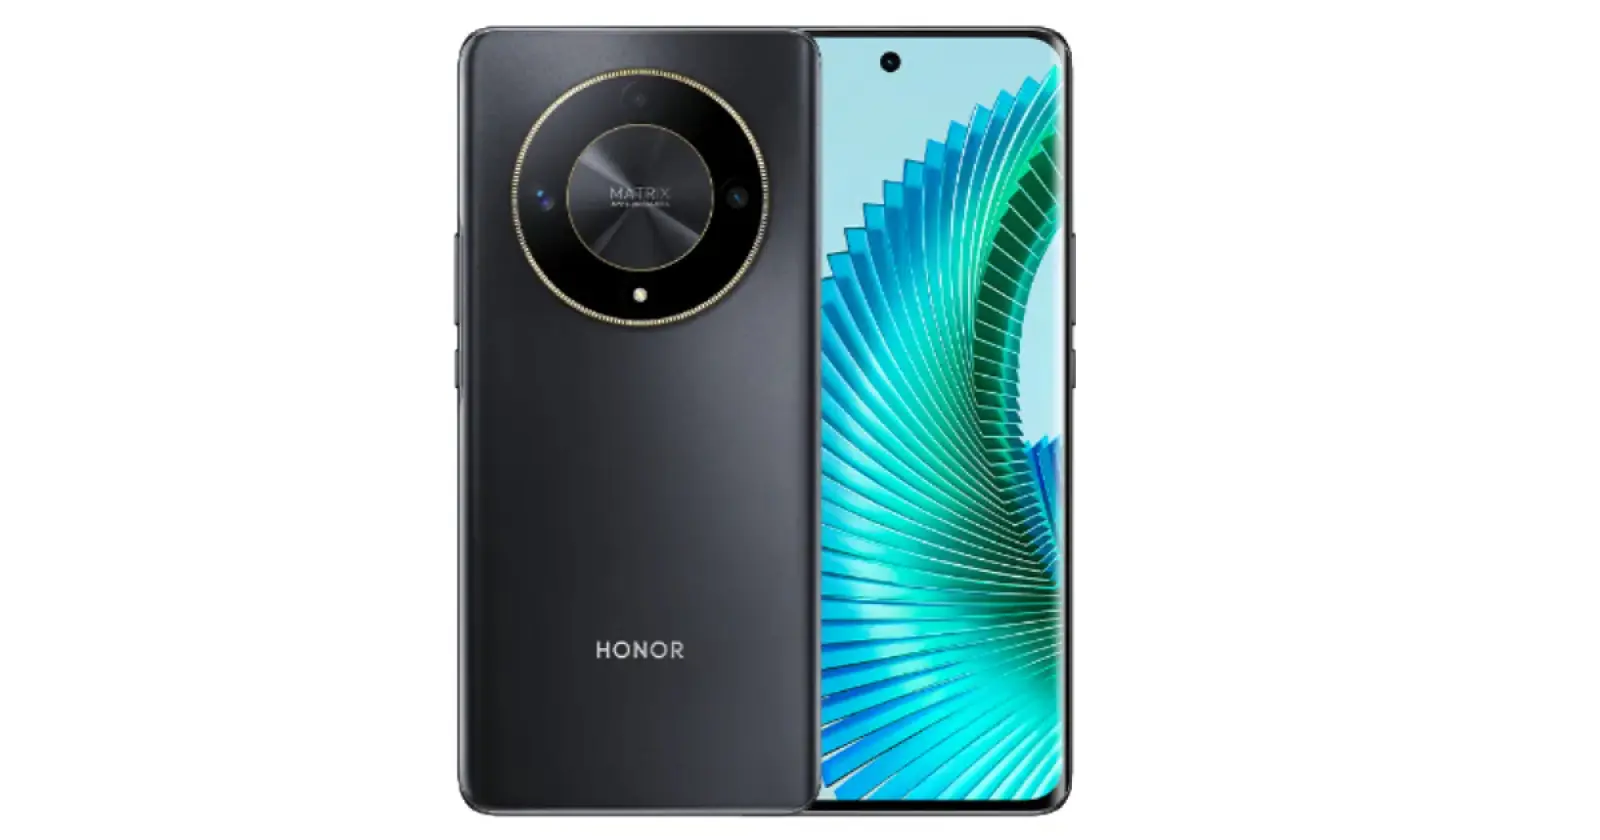 Honor's new phone launched with 108MP camera and 5300mAh battery, know the price and features